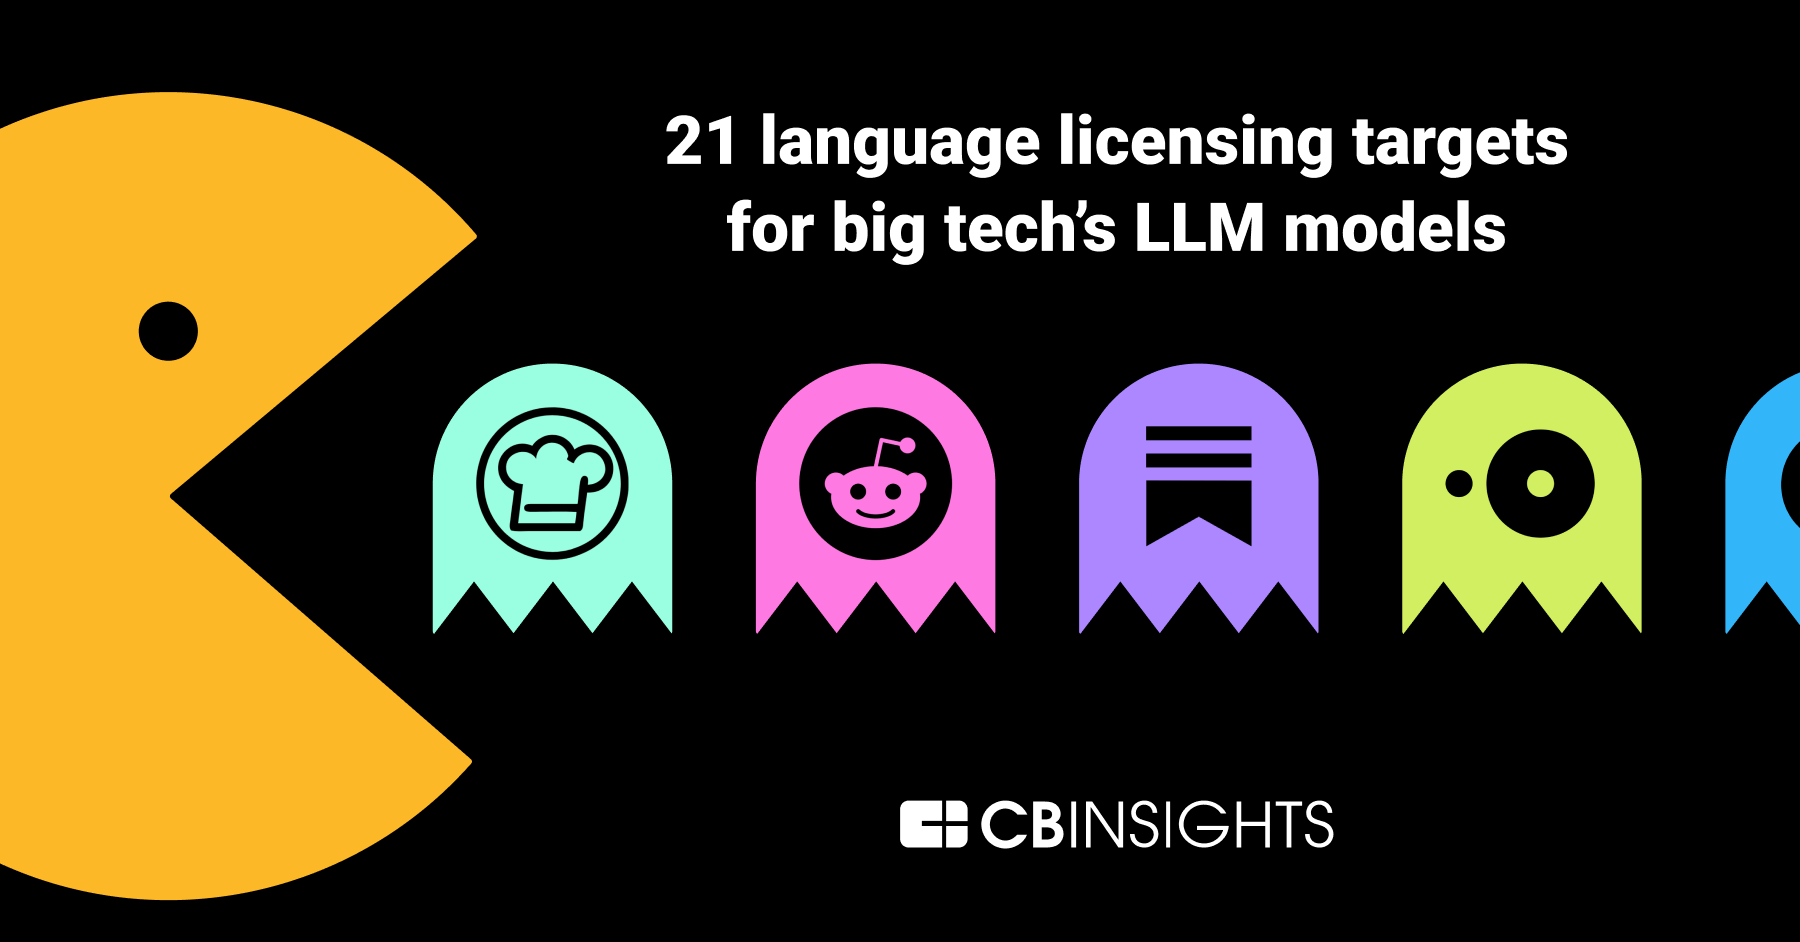 As Google, Microsoft, Facebook, and the rest of big tech compete in generative AI, tying up content publishers will be critical for their LLMs. Here are 21 licensing targets they should lock up - CB Insights Research